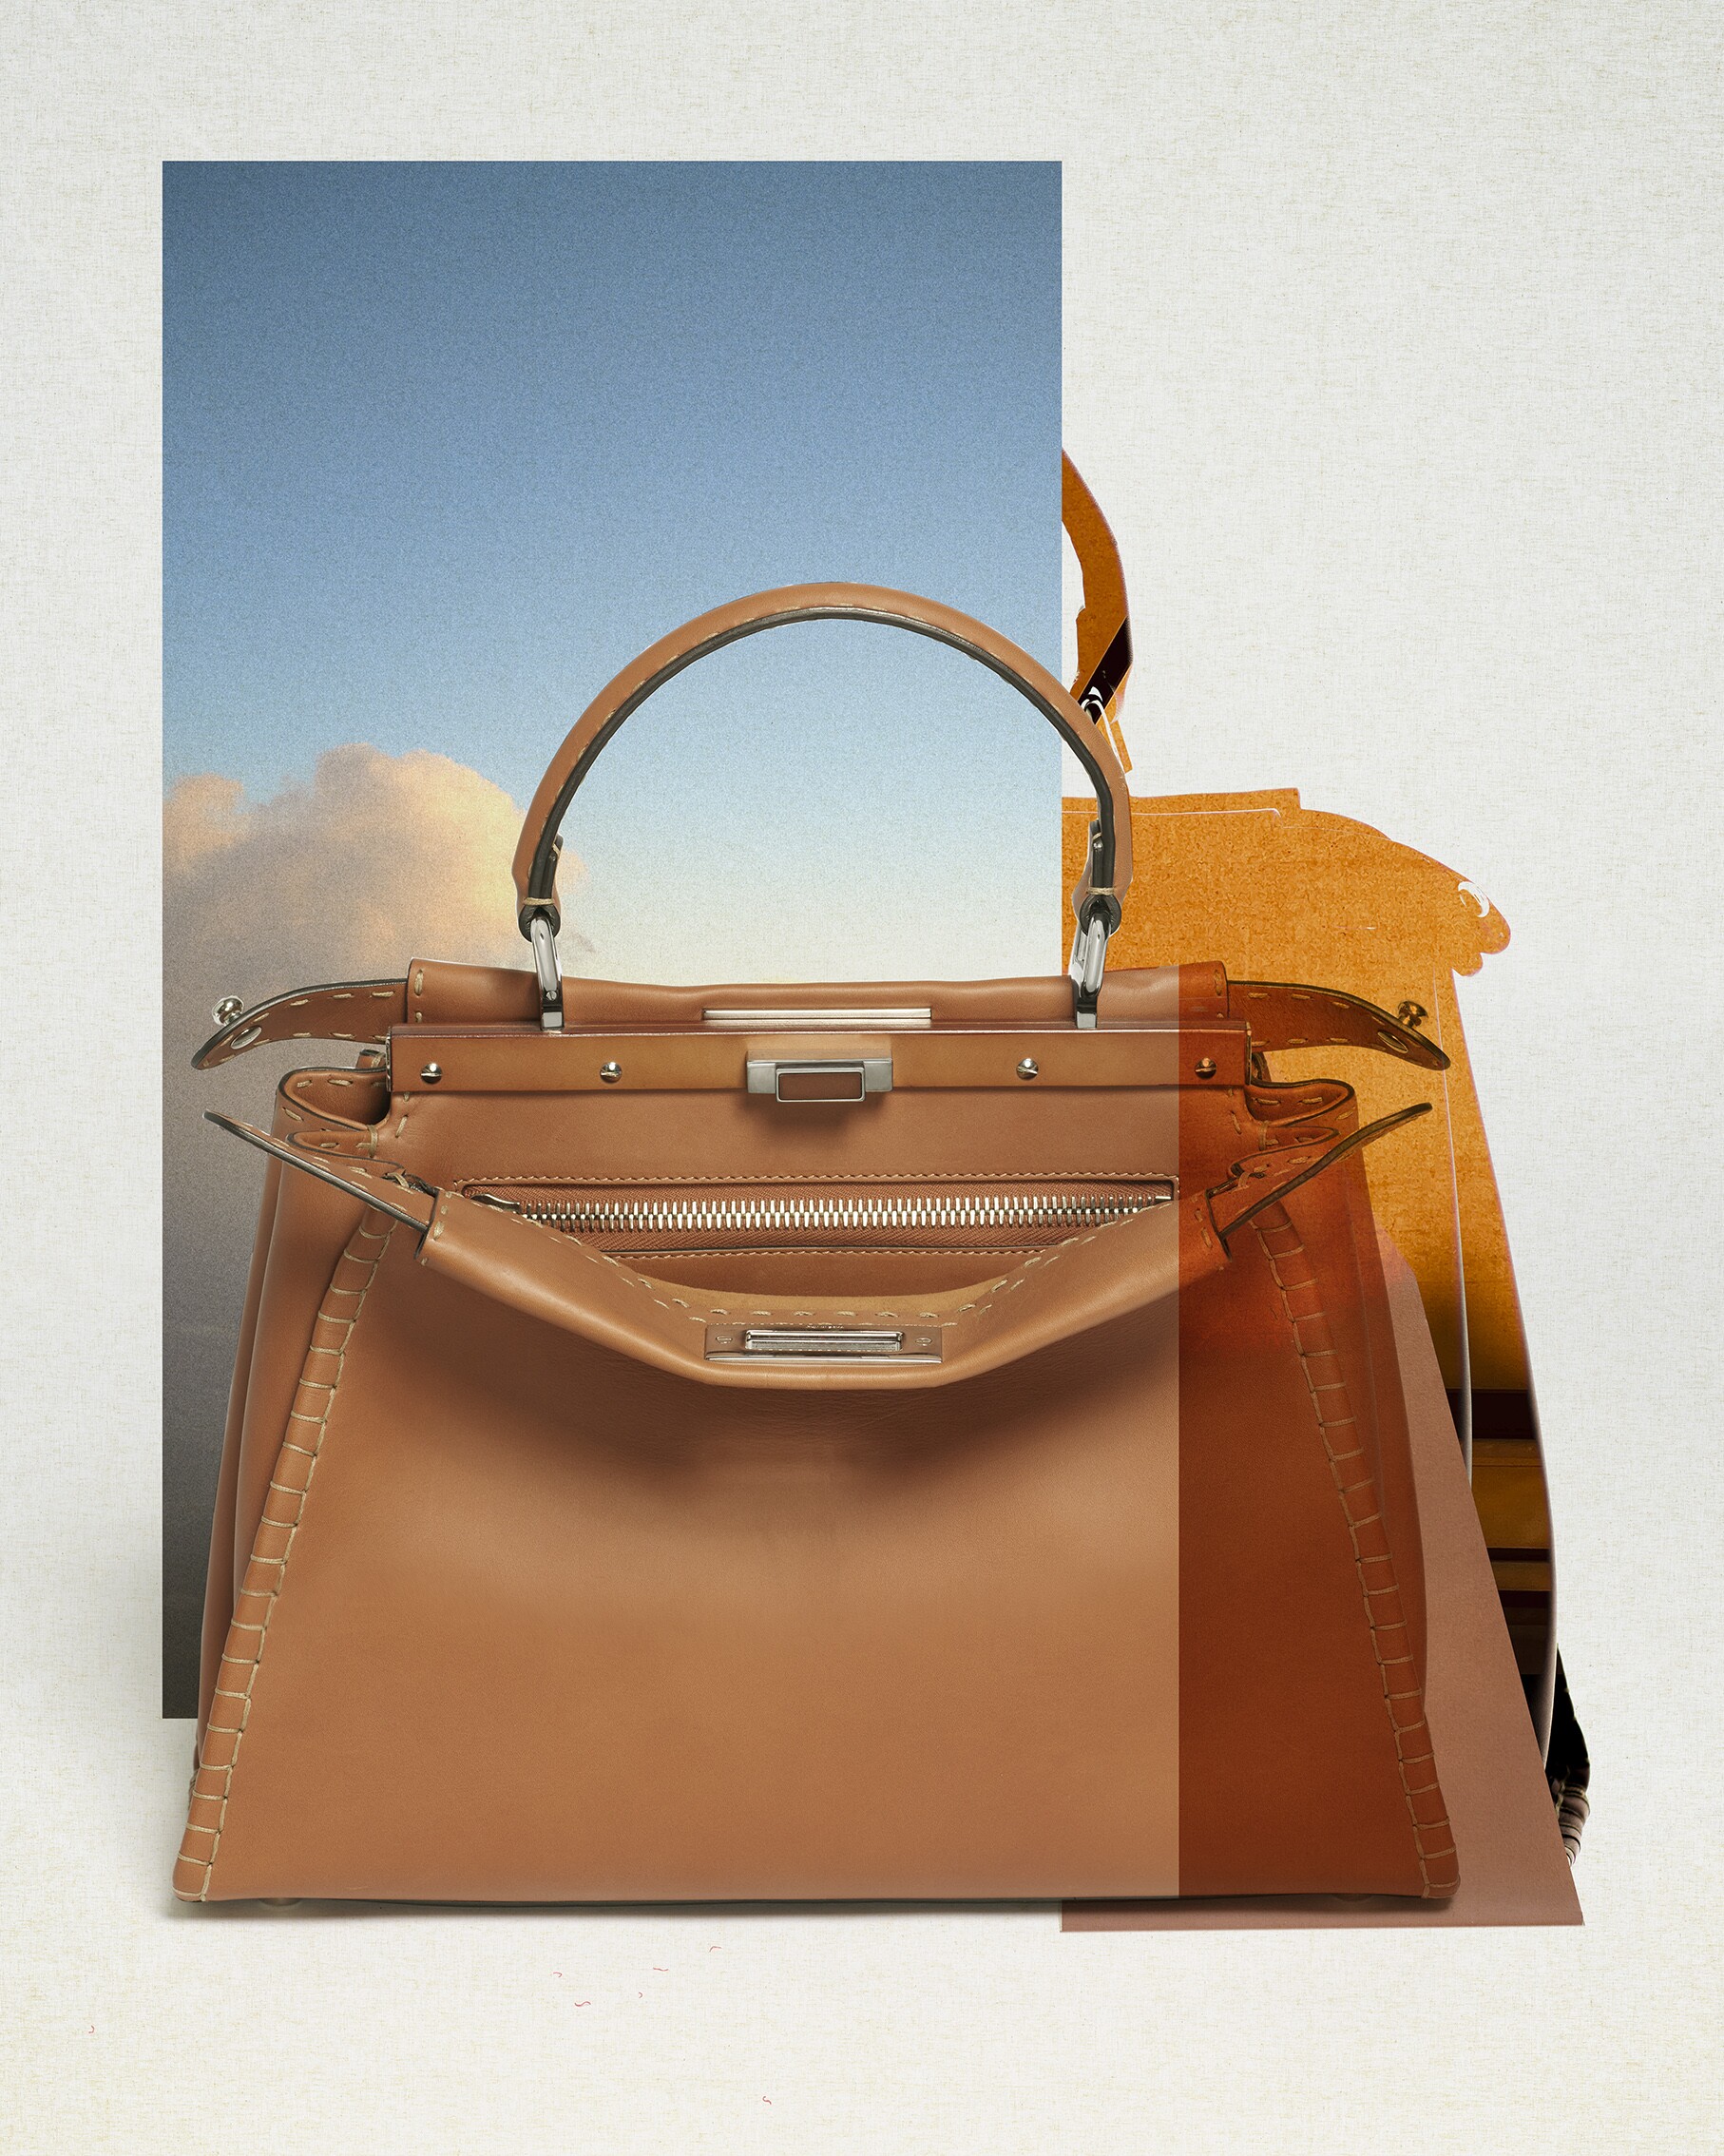 Revising Textures - Peter Langer - Special FENDI 90 years